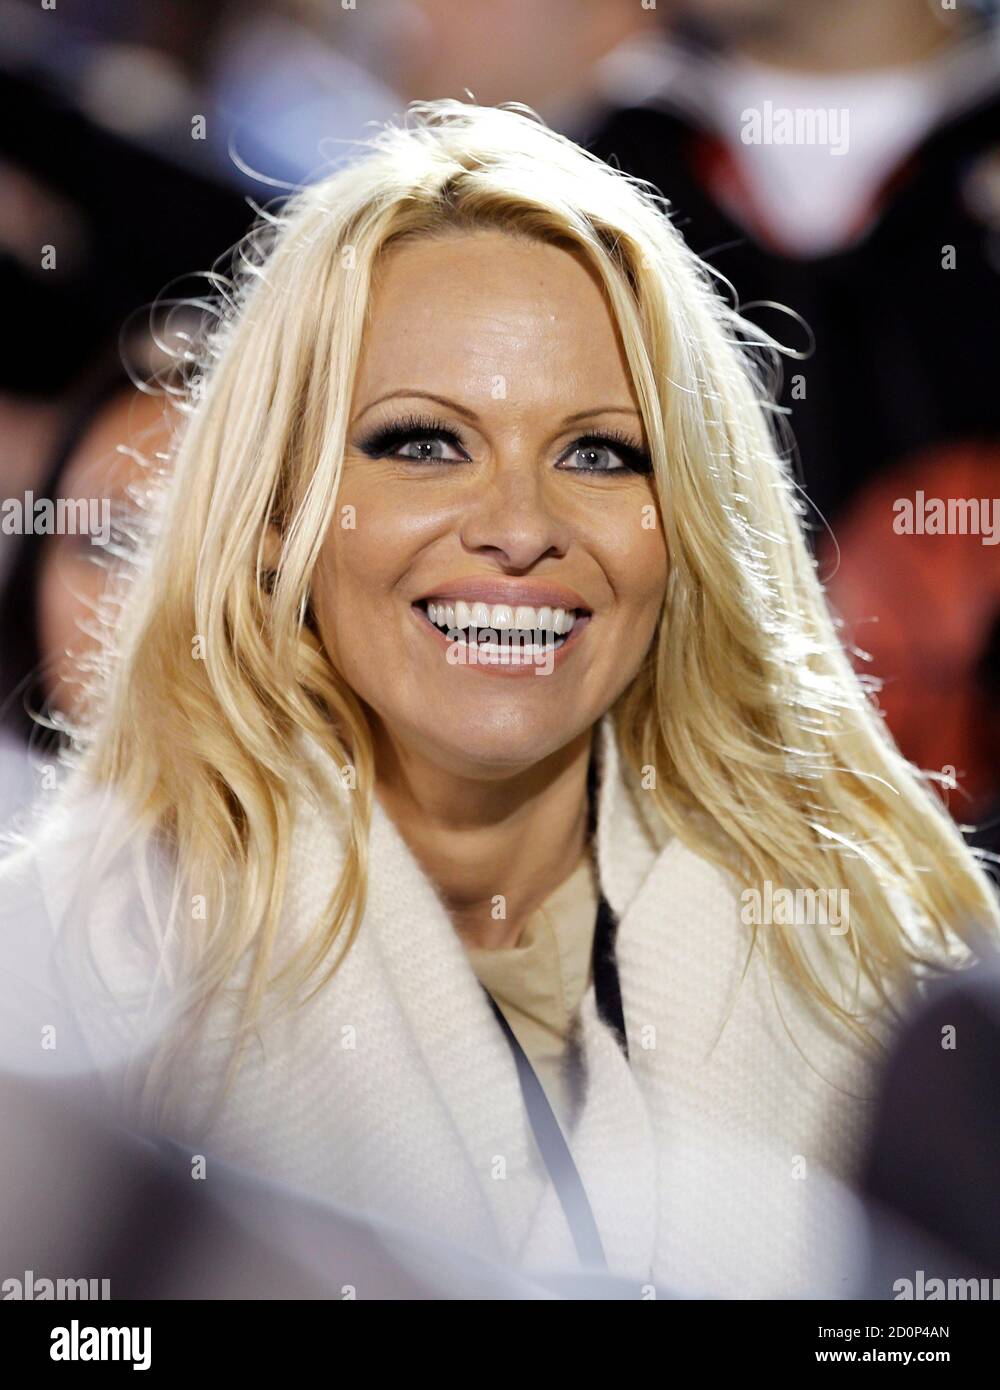 Actress Pamela Anderson watches the NCAA Carrier Classic men's college basketball game between Michigan State Spartans and the North Carolina Tar Heels on the deck of the aircraft carrier USS Carl Vinson in Coronado, California November 11, 2011.   REUTERS/Mike Blake     (UNITED STATES - Tags: SPORT BASKETBALL MILITARY ENTERTAINMENT HEADSHOT) Stock Photo